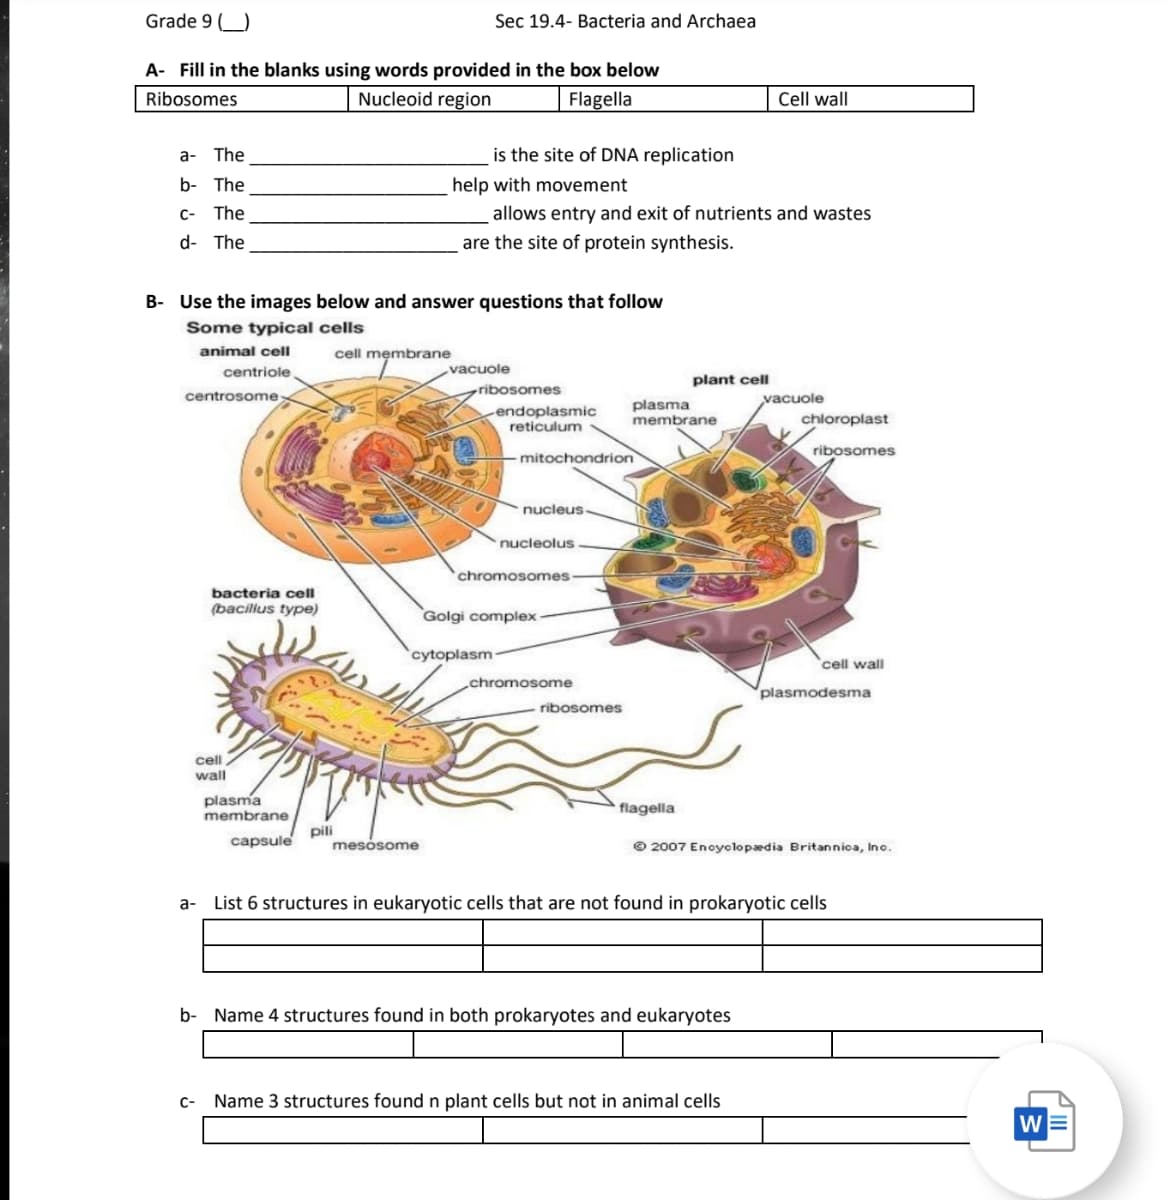 Grade 9)
A- Fill in the blanks using words provided in the box below
Ribosomes
Nucleoid region
Flagella
Cell wall
a- The
is the site of DNA replication
b- The
help with movement
C- The
allows entry and exit of nutrients and wastes
d- The
are the site of protein synthesis.
B- Use the images below and answer questions that follow
Some typical cells
animal cell
cell membrane
centriole
vacuole
vacuole
ribosomes
endoplasmic
reticulum
✓
centrosome
bacteria cell
(bacillus type)
Sec 19.4- Bacteria and Archaea
cell
wall
pili
nucleolus
chromosomes.
-mitochondrion
nucleus
Golgi complex
cytoplasm-
plant cell
plasma
membrane
chromosome
chloroplast
ribosomes
cell wall
-ribosomes
plasma
membrane
capsule
mesosome
a-
List 6 structures in eukaryotic cells that are not found in prokaryotic cells
b- Name 4 structures found in both prokaryotes and eukaryotes
C- Name 3 structures found n plant cells but not in animal cells
plasmodesma
flagella
© 2007 Encyclopædia Britannica, Inc.
W